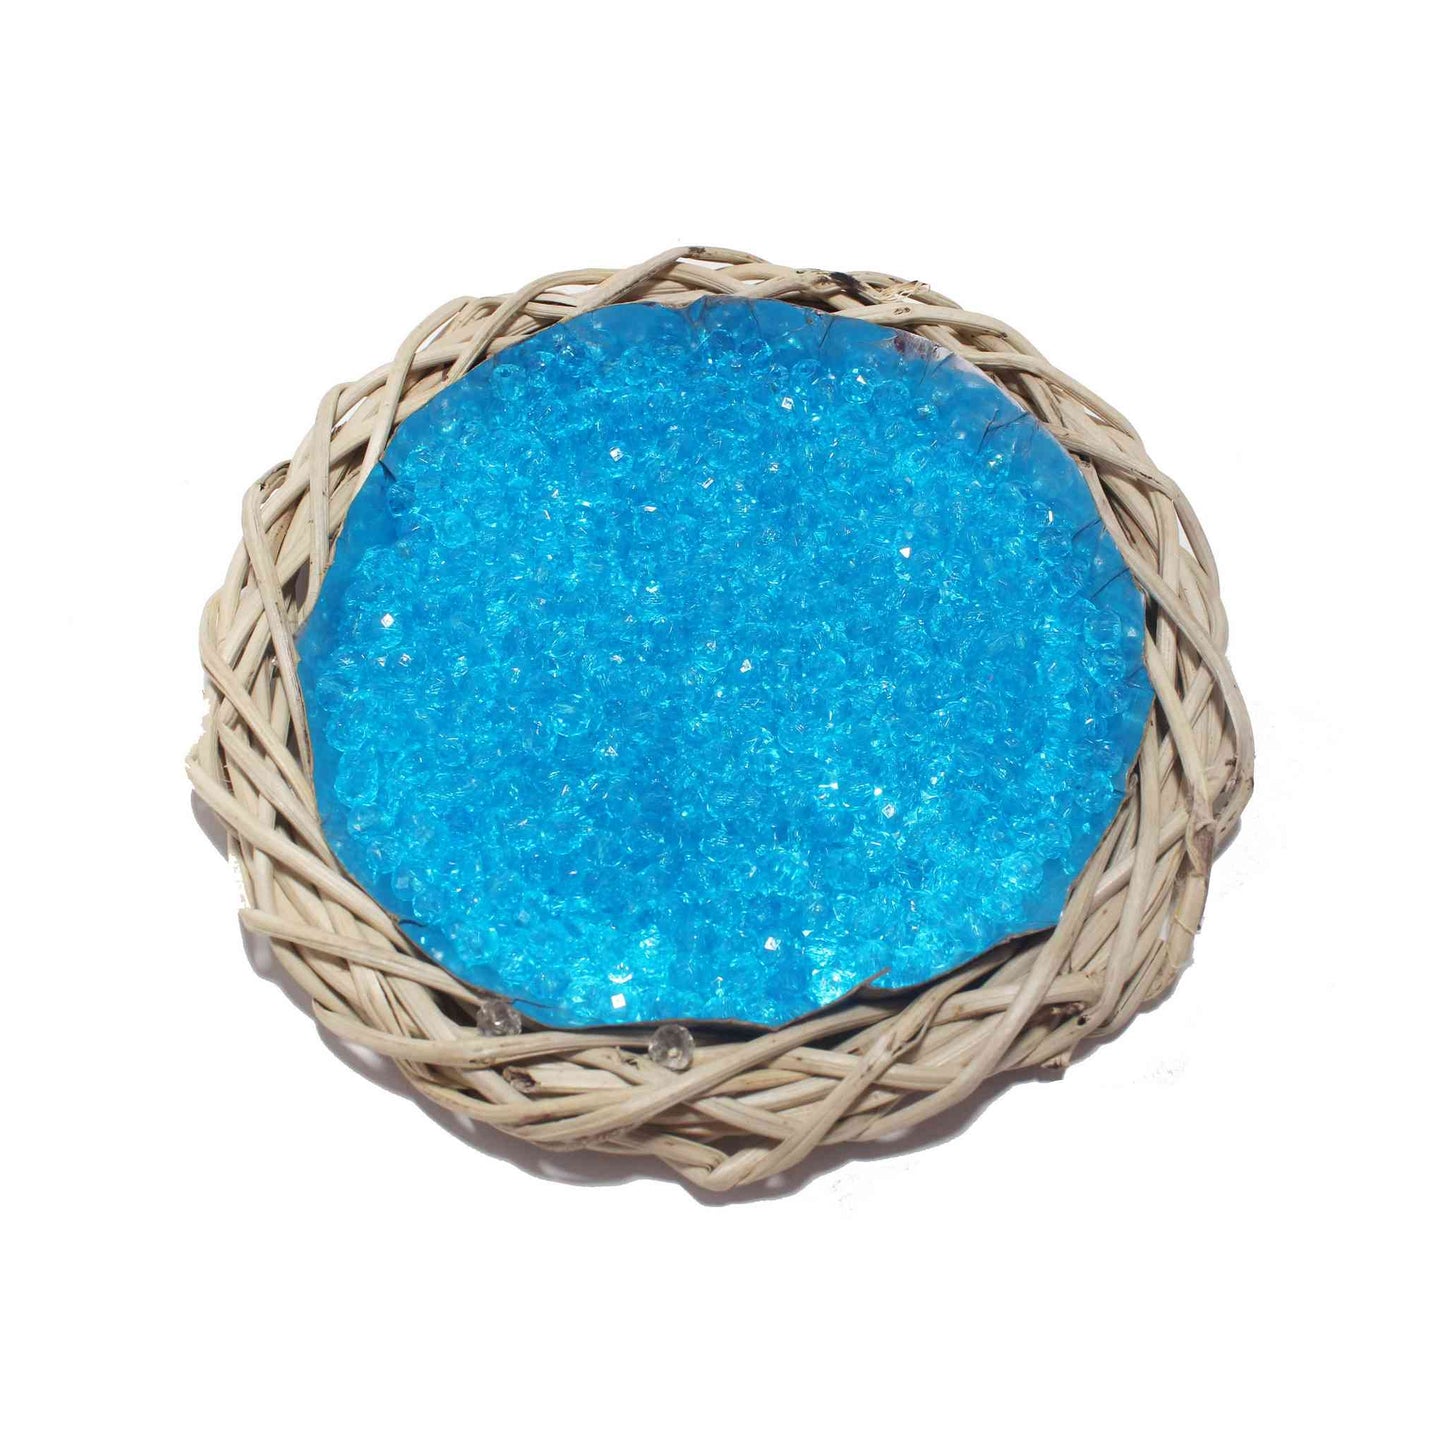 Octagonal Colored Glass Beads for DIY Craft Trousseau Packing, Craft or Decor, 100 Grams